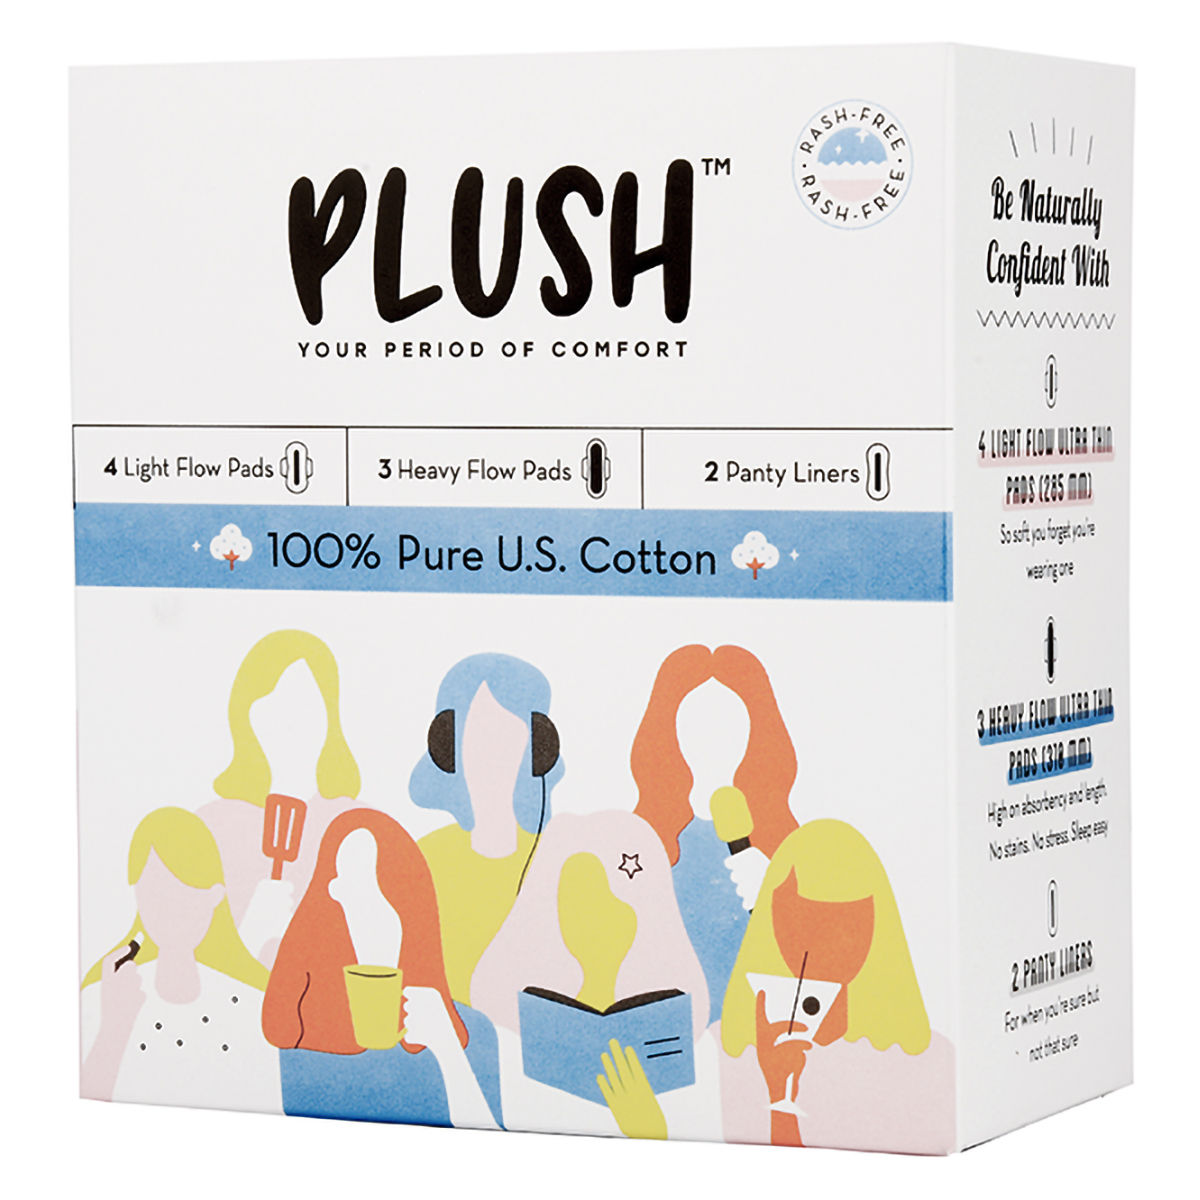 Buy Plush 100% Pure US Cotton Ultra Thin Sanitary Pads, 7 Count Online